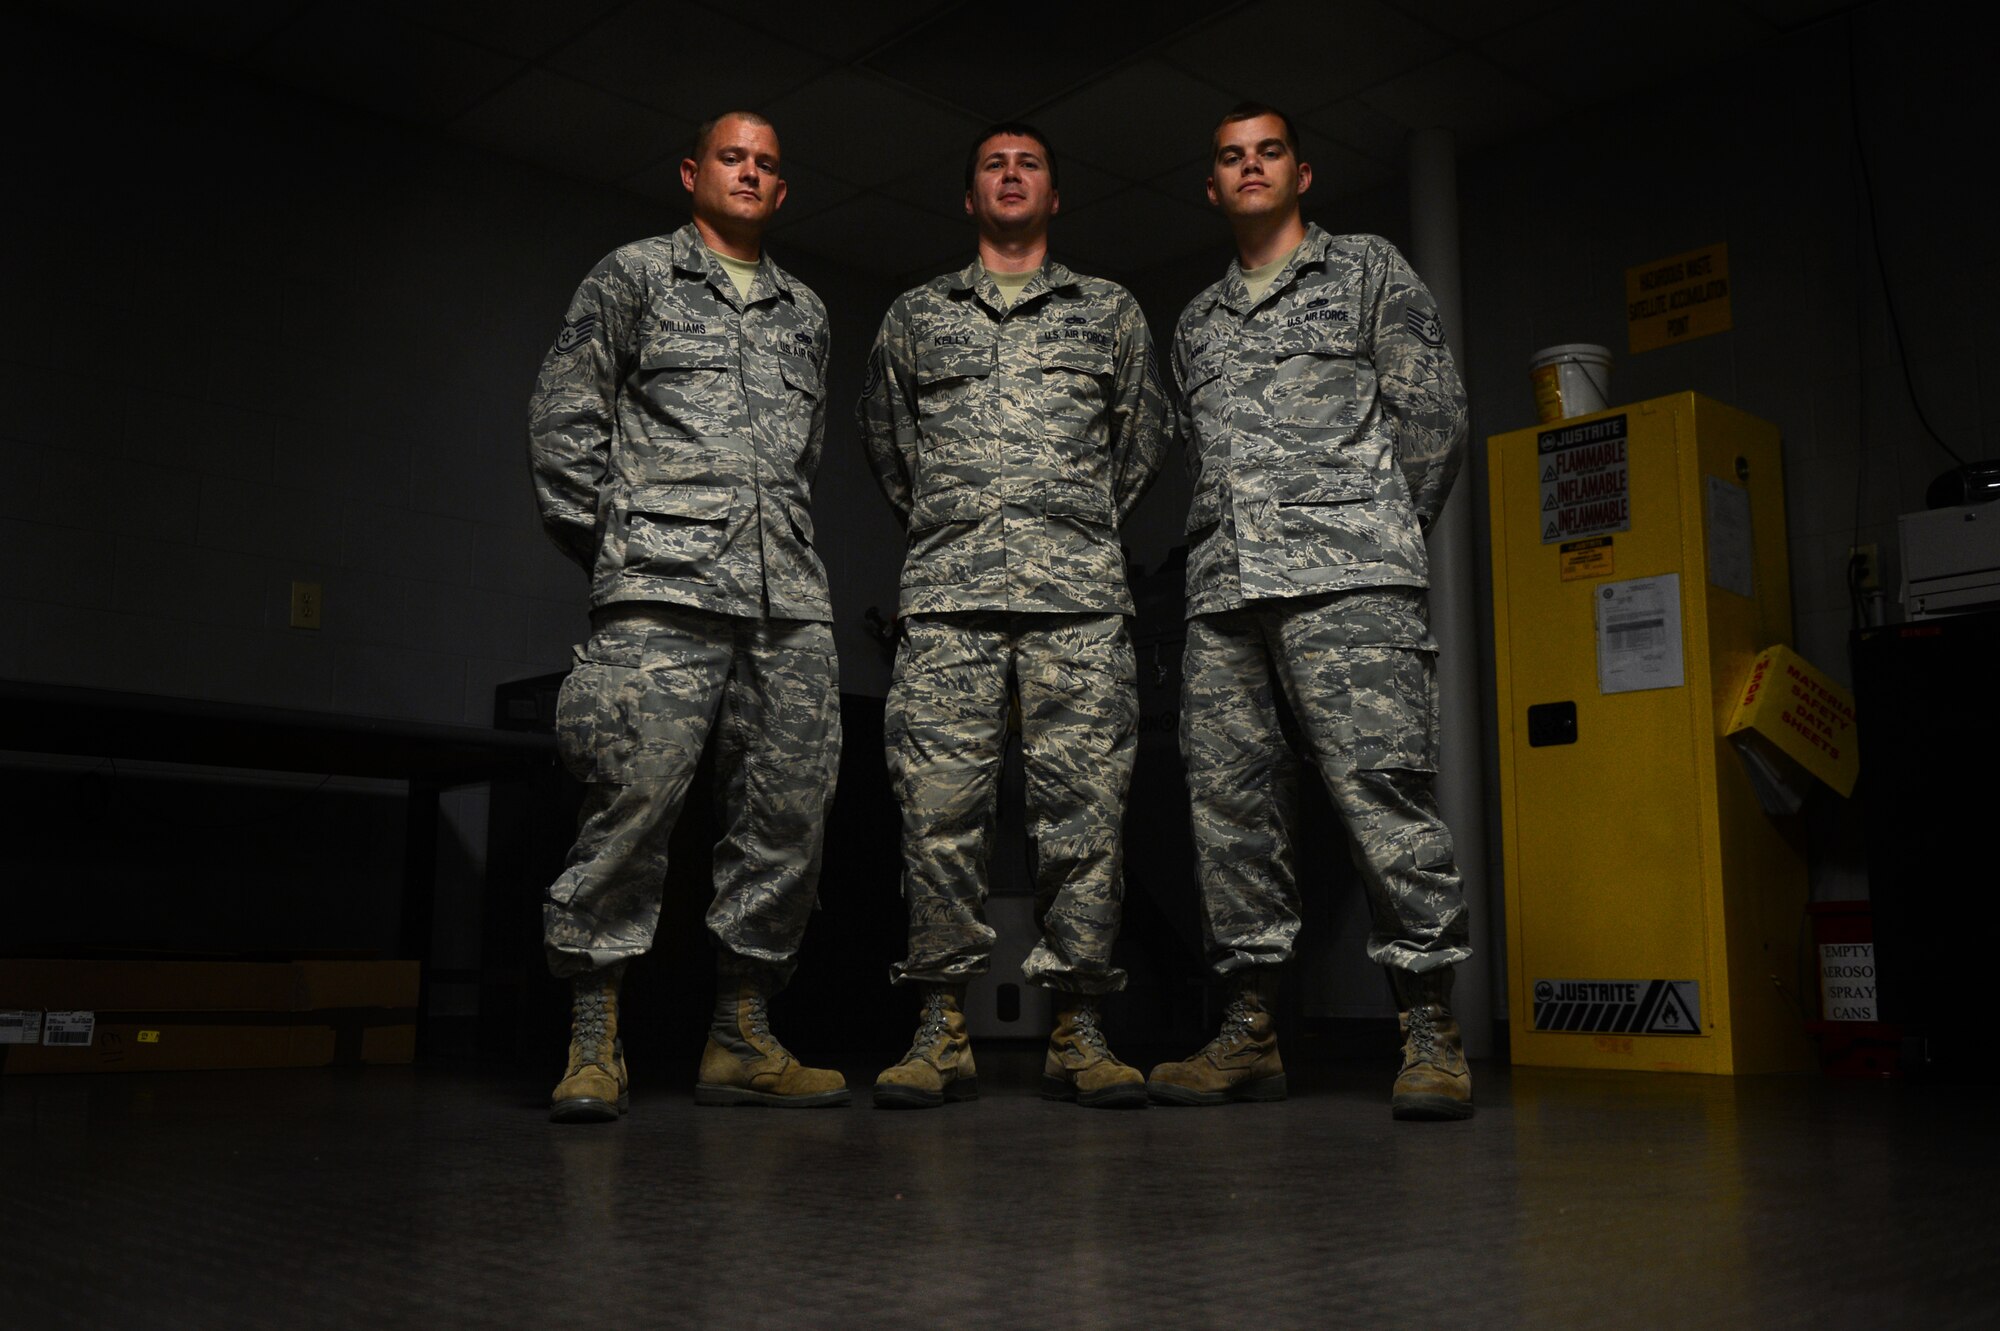 [From left] U.S. Air Force Staff Sgt. Scott Williams, Tech Sgt. Michael Kelly and Staff Sgt. Laverne Borst, 20th Maintenance Group Air Force Repair Enhancement Program technicians, stand in their work environment at Shaw Air Force Base, S.C., May 21, 2014.  The three technician’s goal is to save the 20th Fighter Wing at least $100,000 each month by fixing broken parts instead of buying new ones. (U.S. Air Force photo by Airman 1st Class Jensen Stidham/Released)